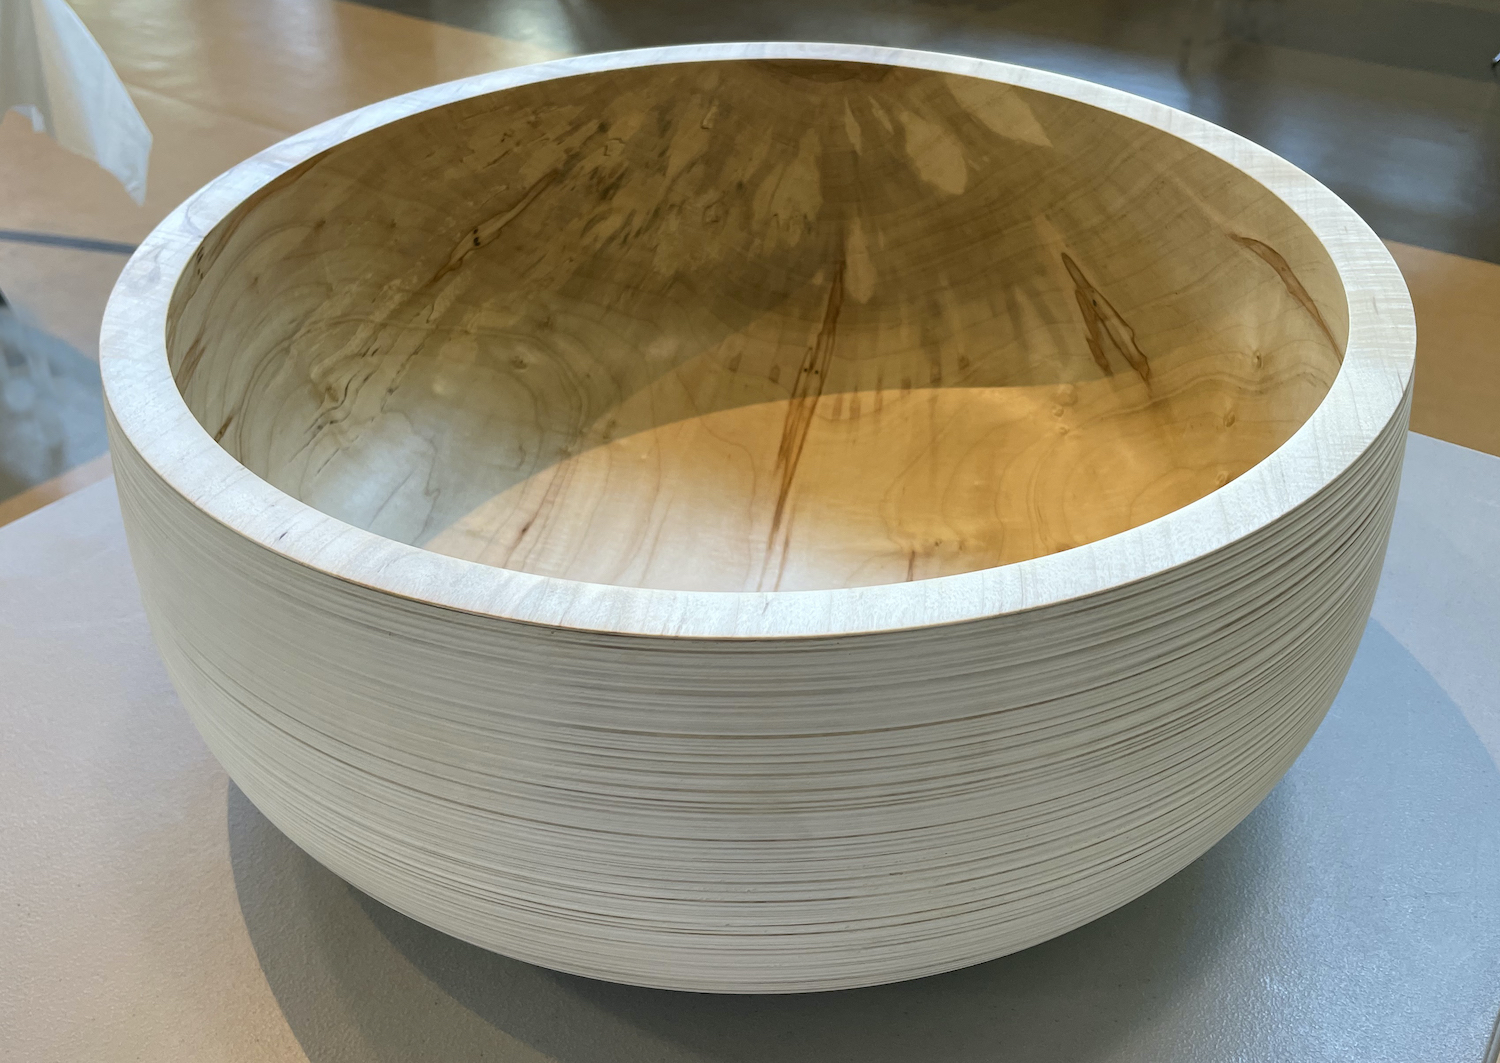 Wooden bowl made out of light and Carmel colored wood is sitting on a table. 